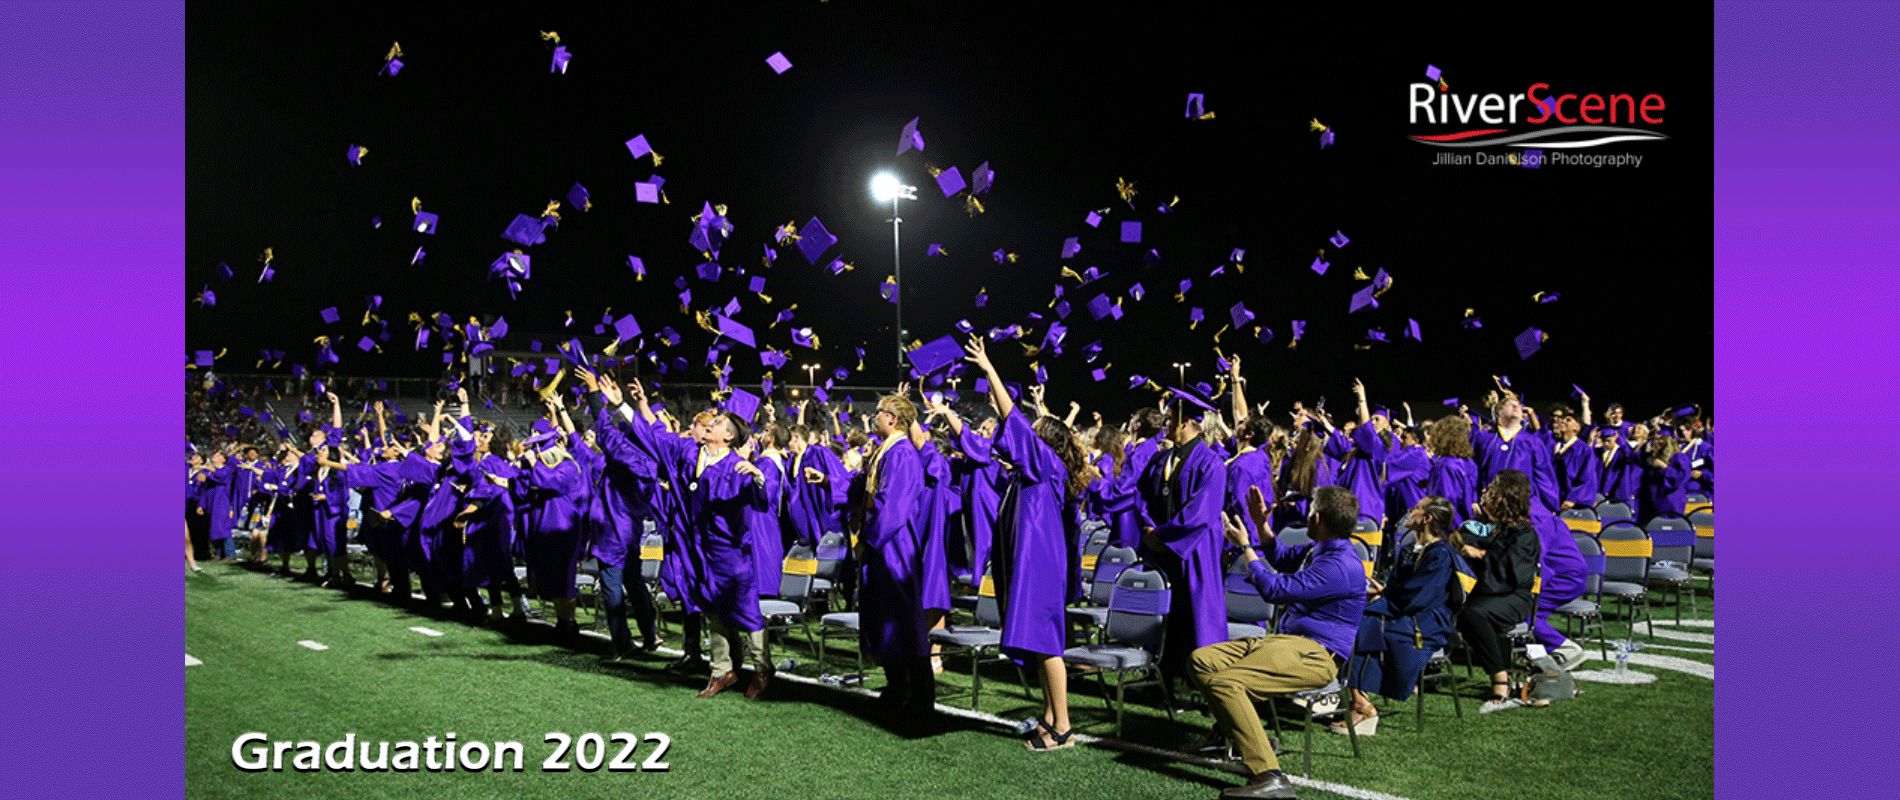 2022 Graduation class tossing caps into the air